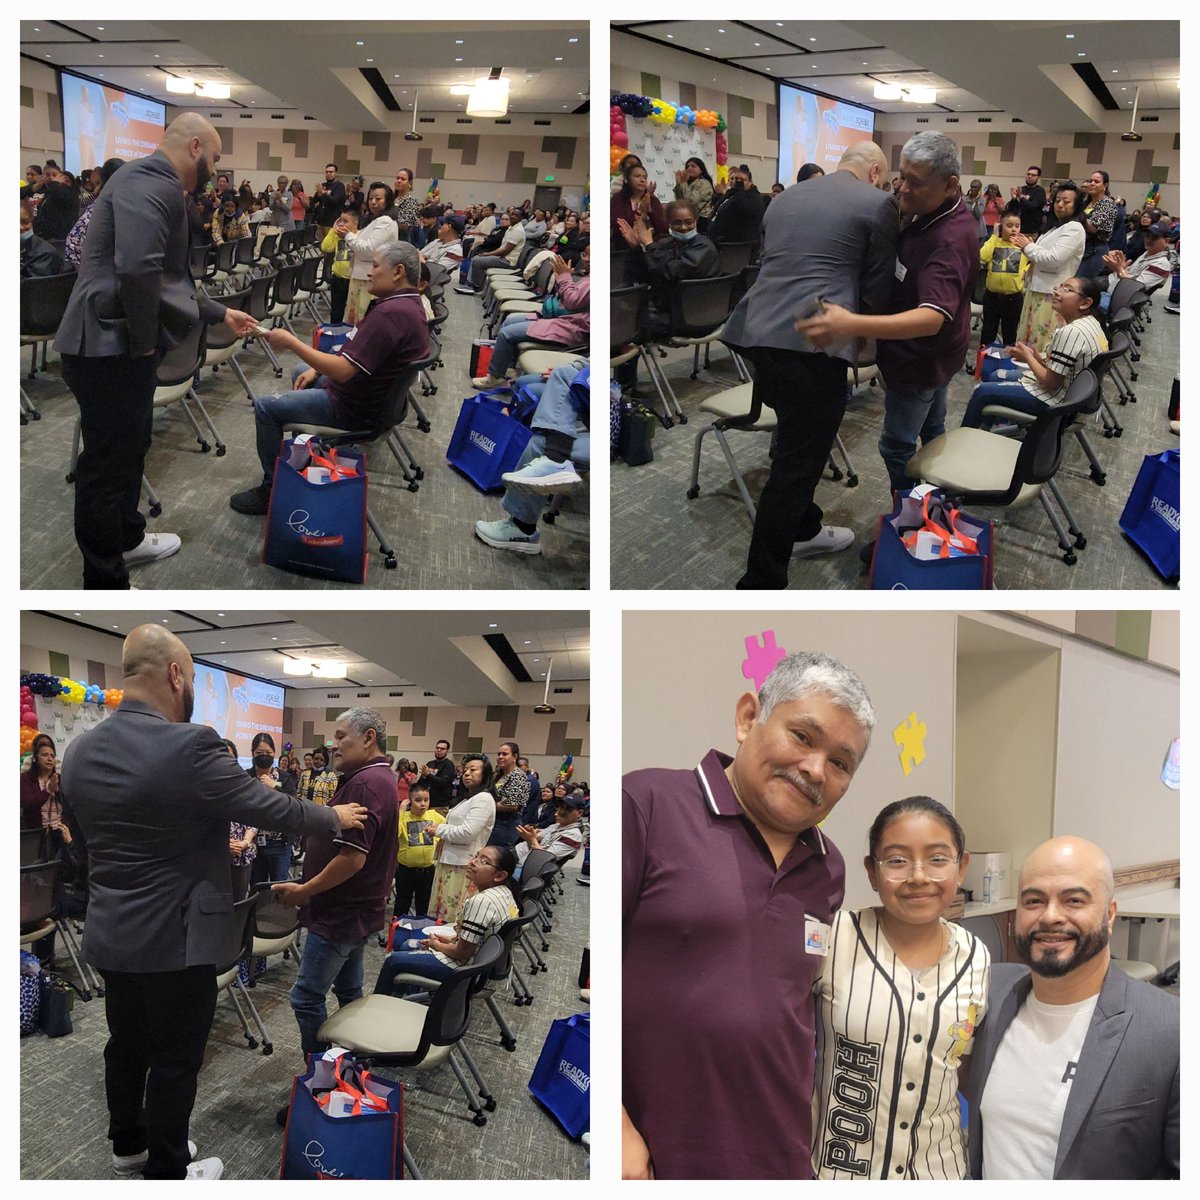 Today was our #FamilyU conference. @AliefISD @Alief_Fame #WeAreAlief This year was a special one full of fun, love, and emotional moments. Thank you to @CoolSpeak Ernesto Mejia for impacting our  #Alieffamilies .
Next stop #TasteOfAlief on April, stay tuned for more information.